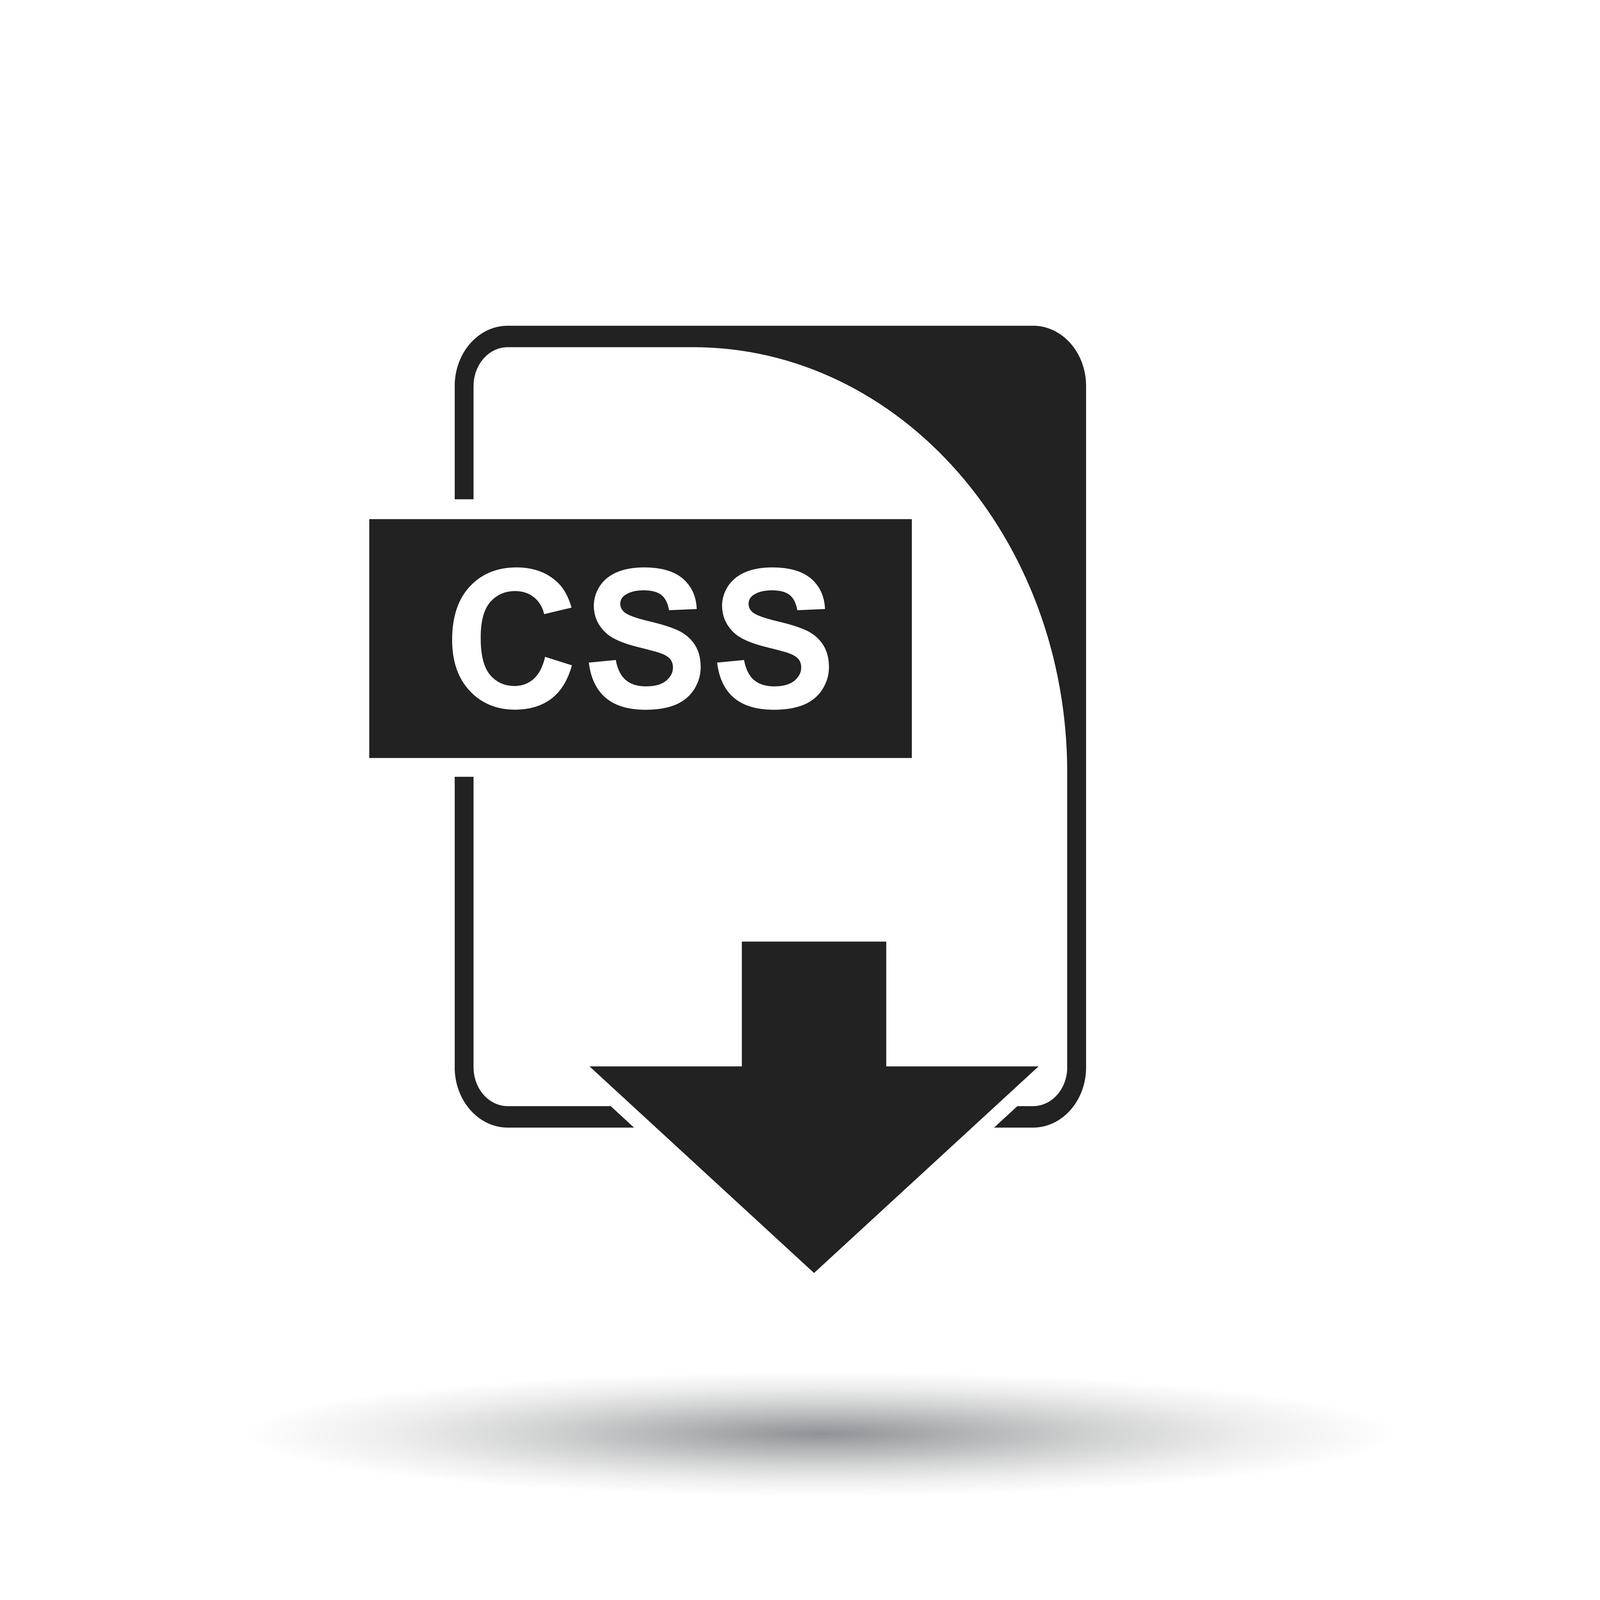 CSS icon. Flat vector illustration. CSS download sign symbol with shadow on white background.